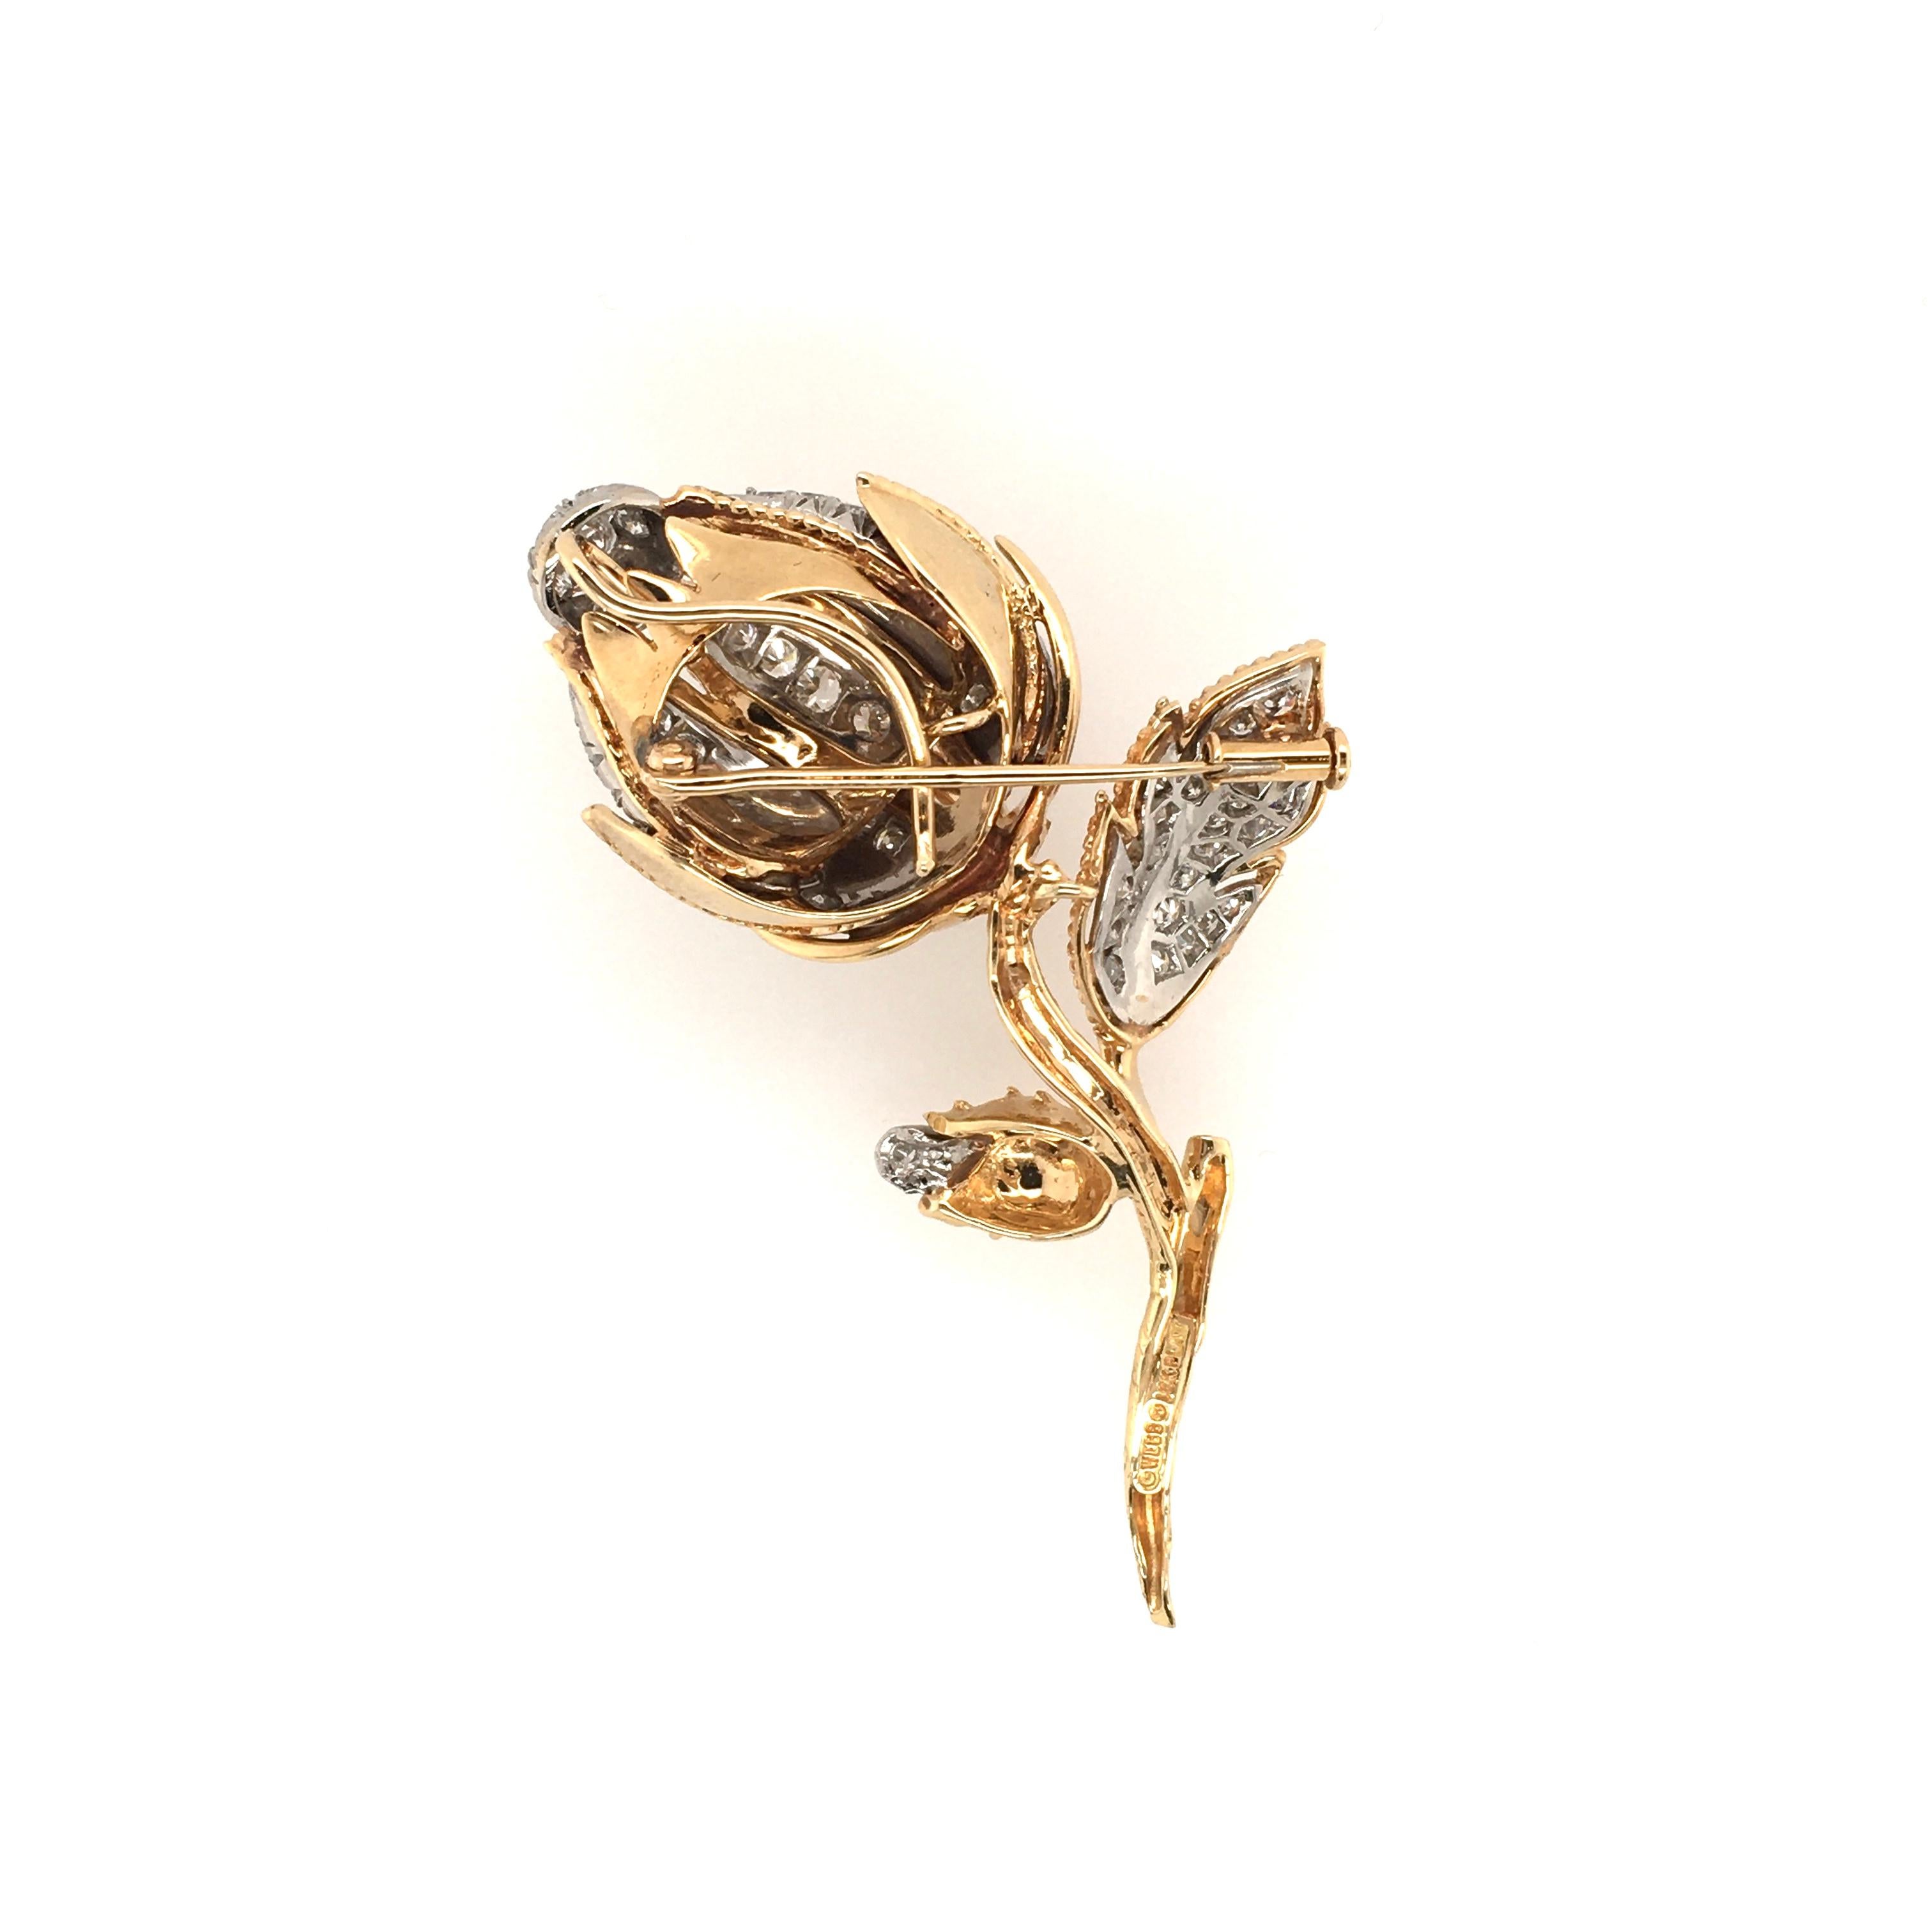 An 18 karat yellow gold, platinum and diamond brooch. Circa 1960. David Webb, Designed as a textured and polished gold rose, enhanced by pave set diamonds. Sixty three (63) diamonds weigh approximately 3.00 carats, Length is approximately 2 3/4